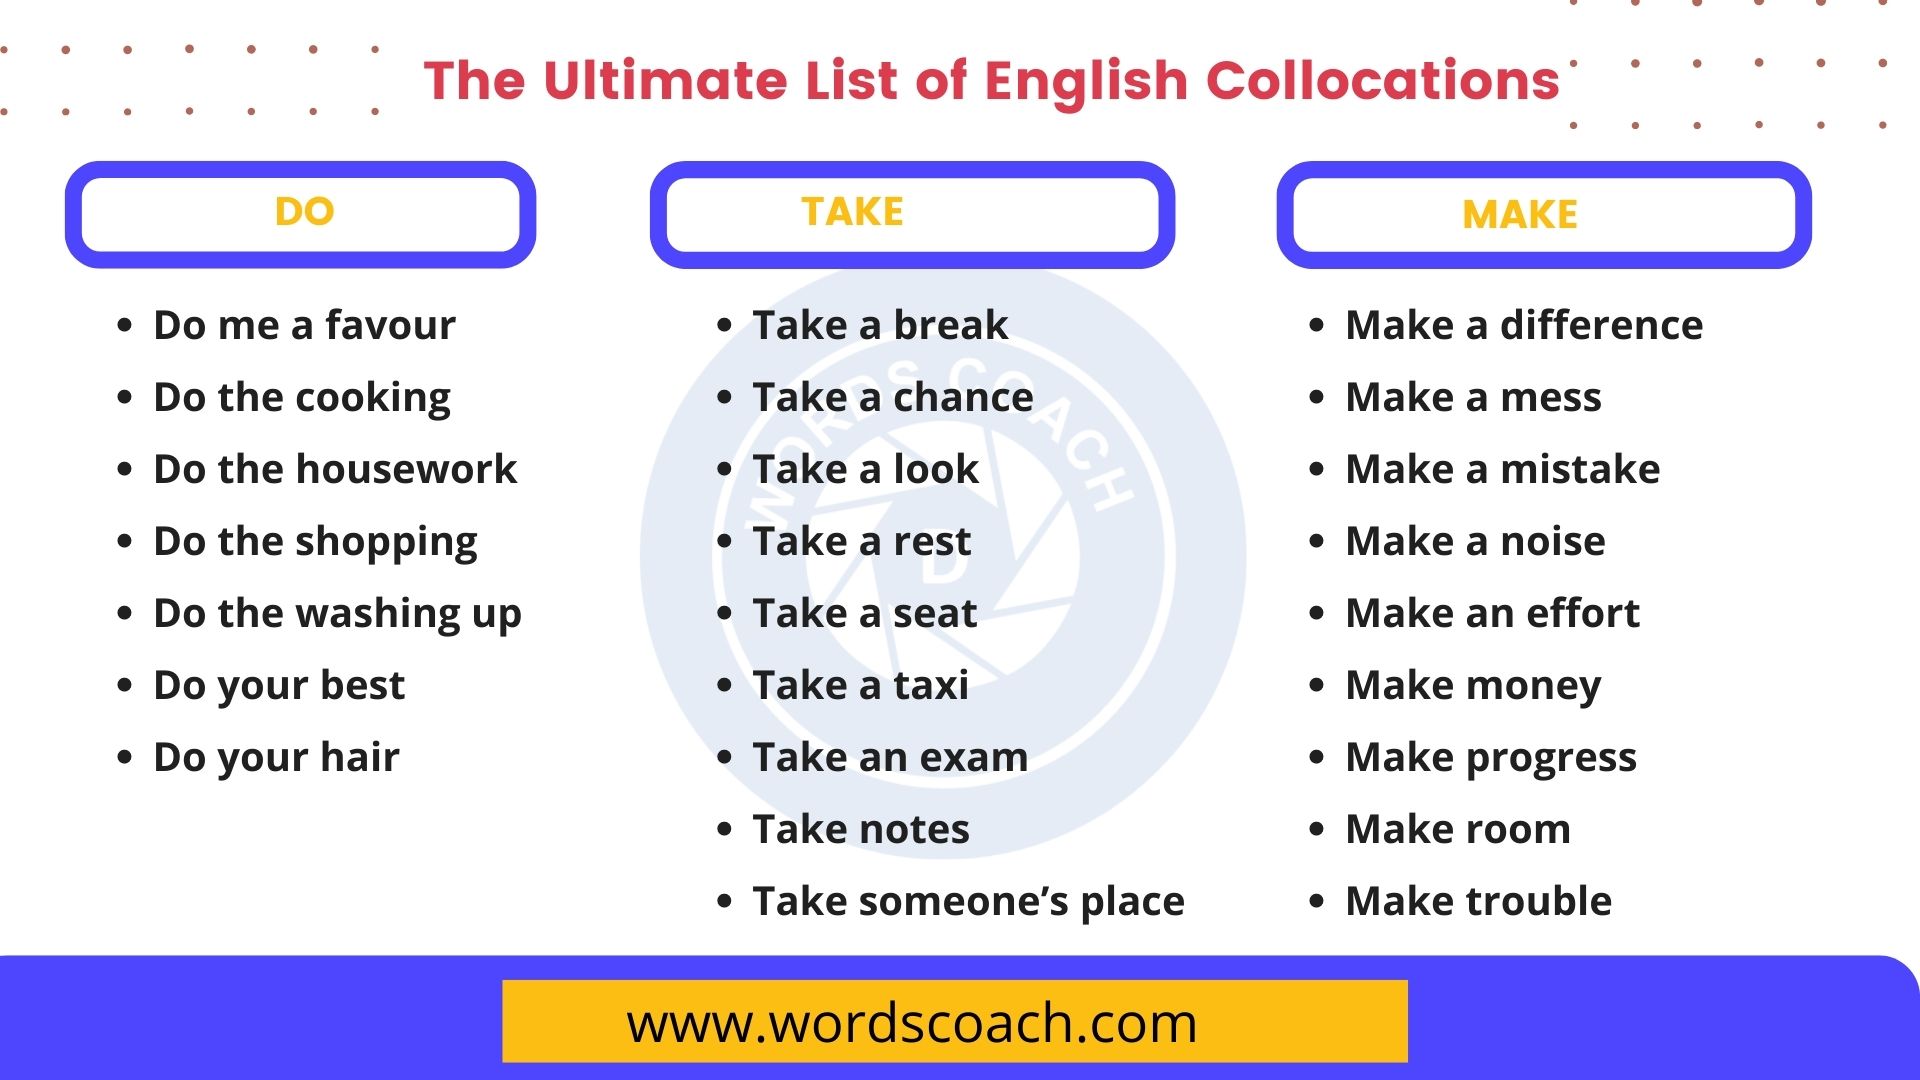 The Ultimate List of English Collocations